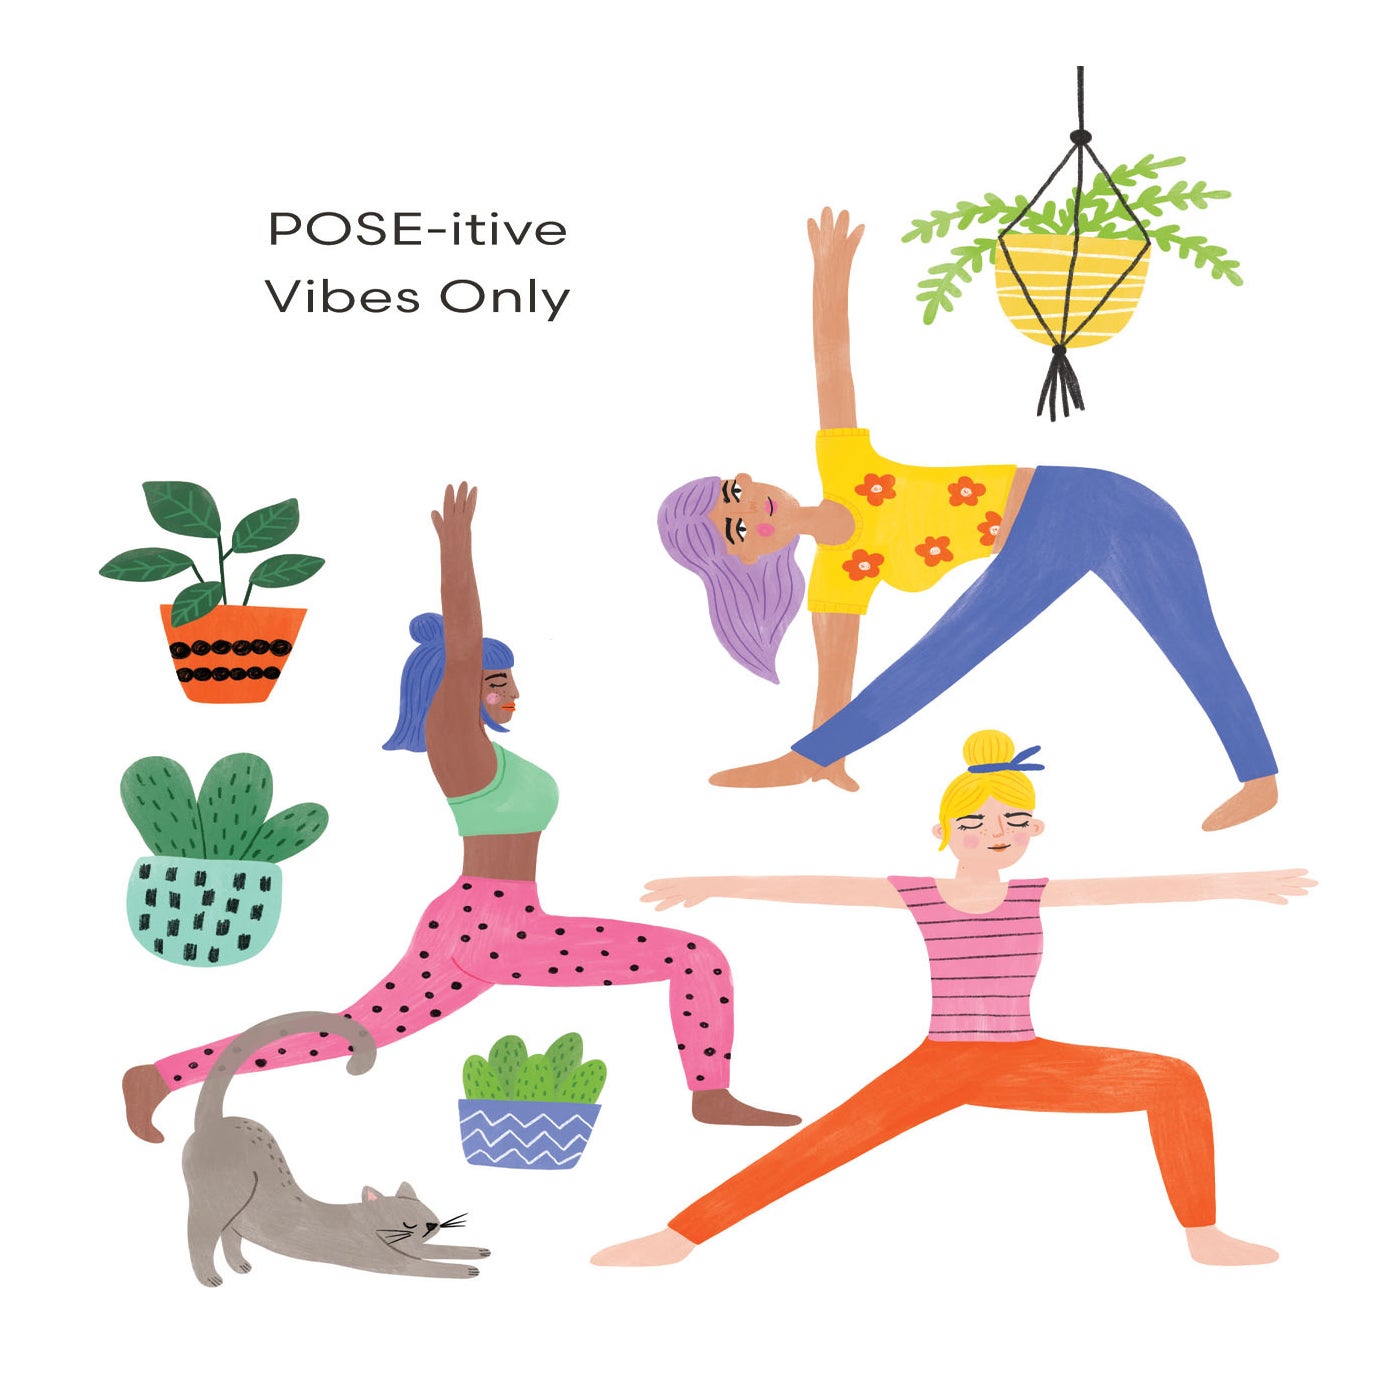 About  Vital Vibes Yoga